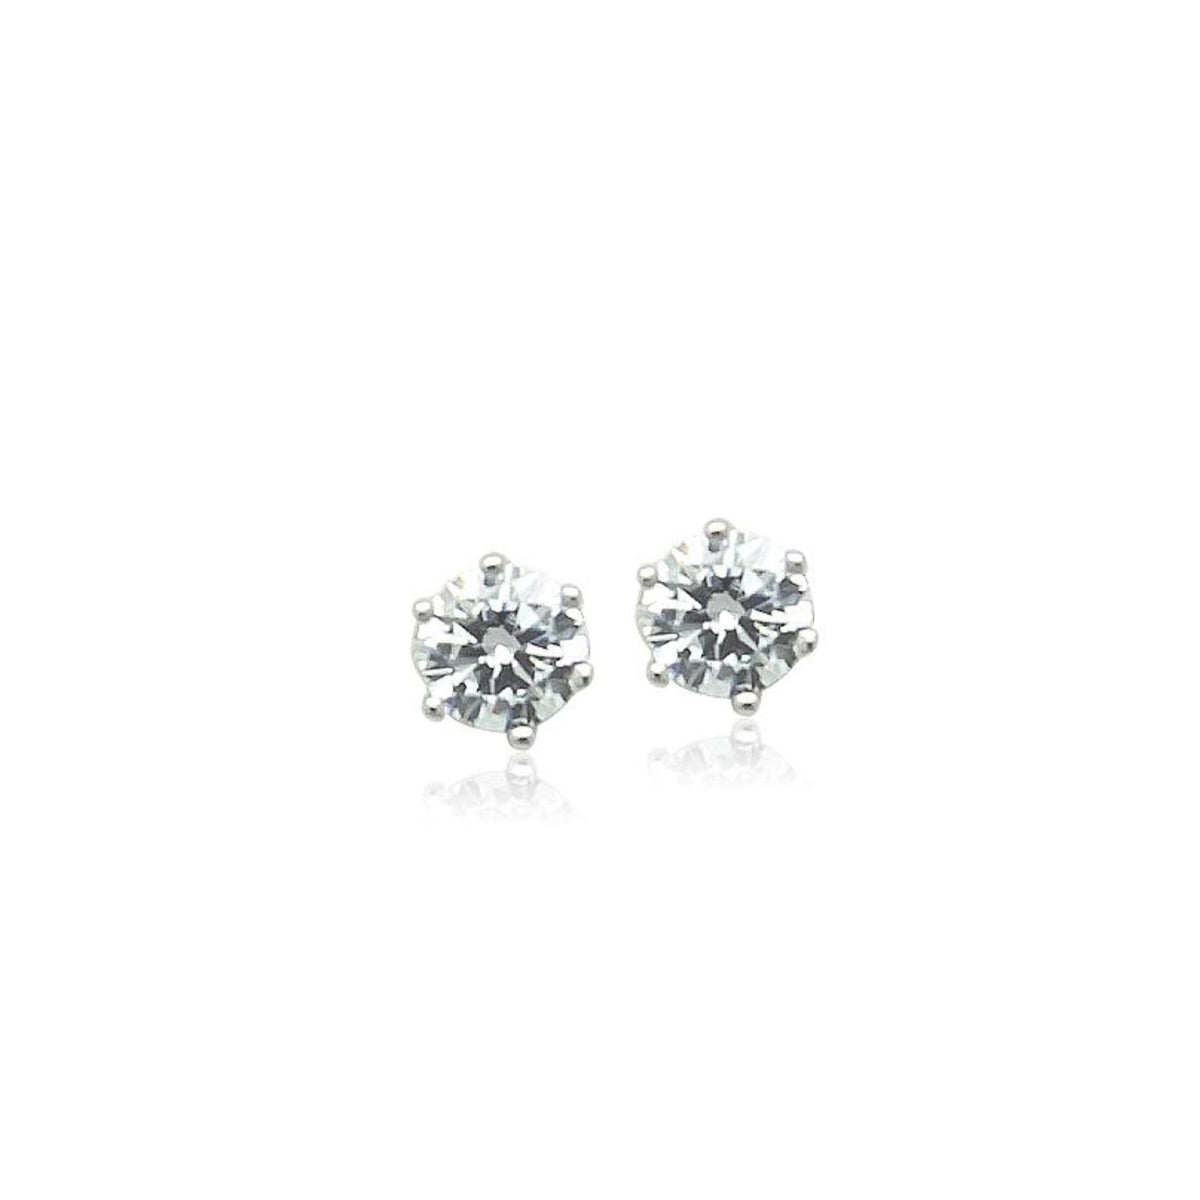 8mm Cubic Zirconia Solitaire Stud Earring - CHOMEL